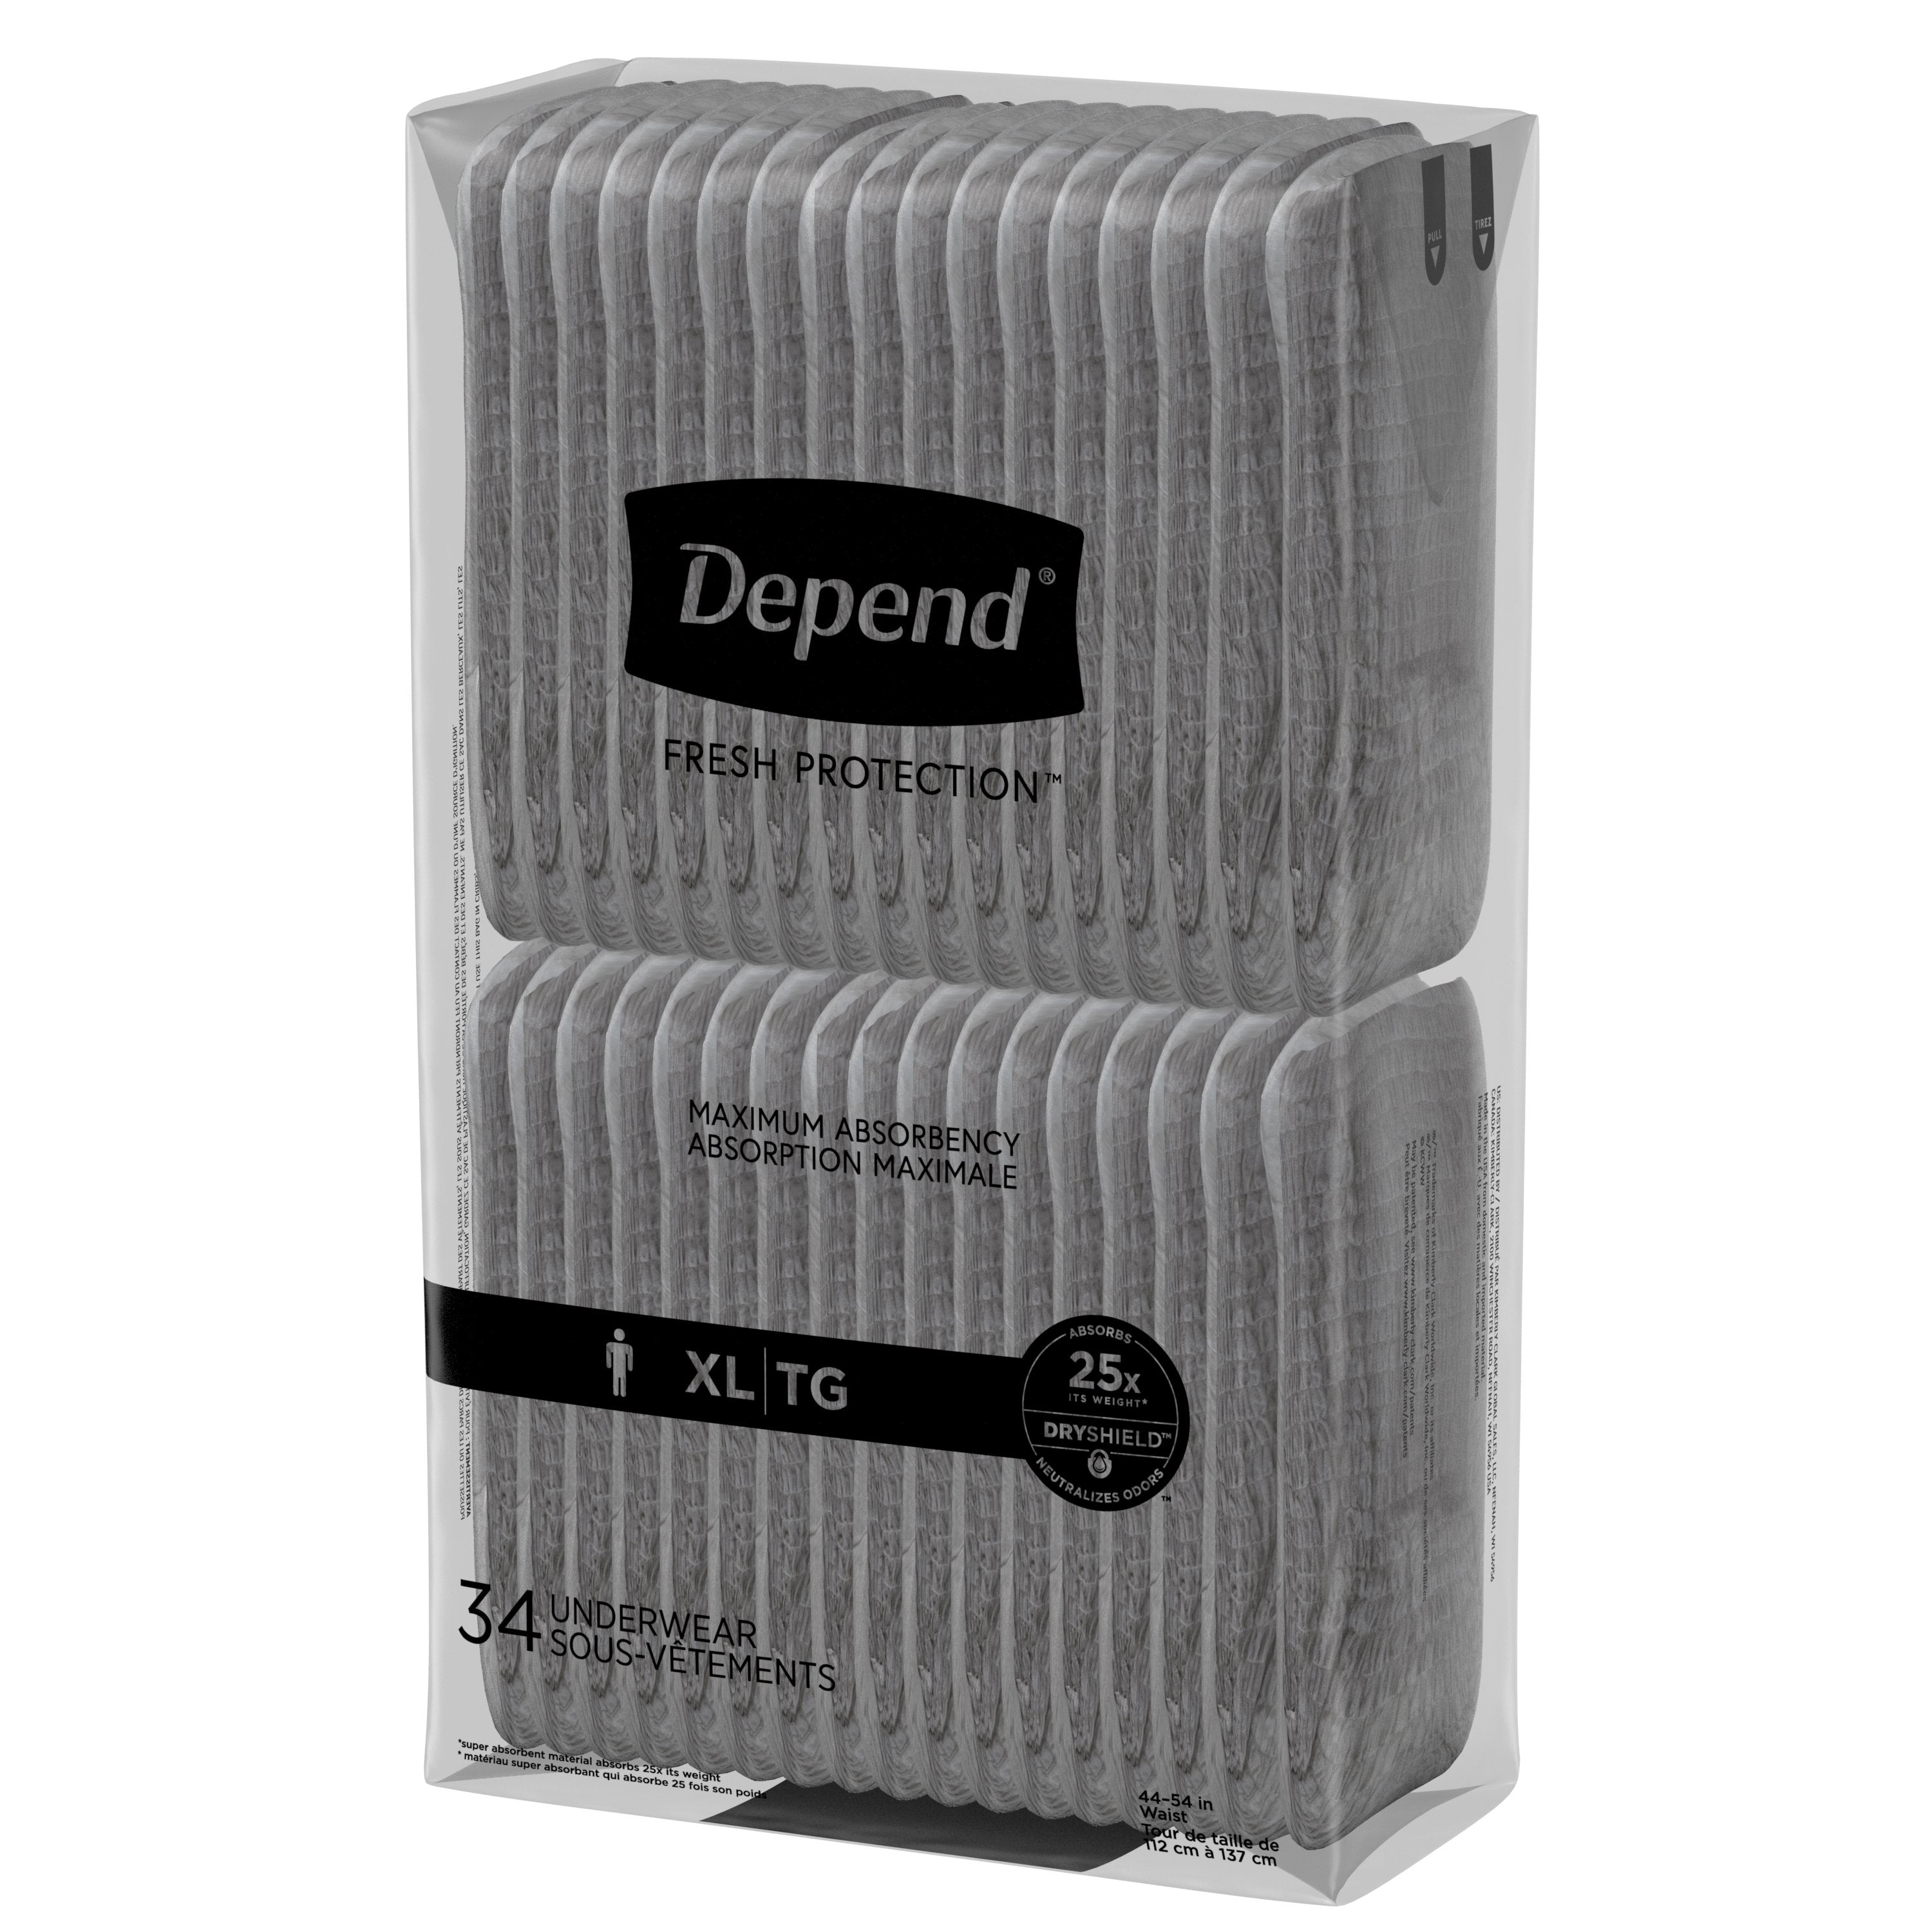 Depend Fresh Protection Underwear for Men - Value Pack